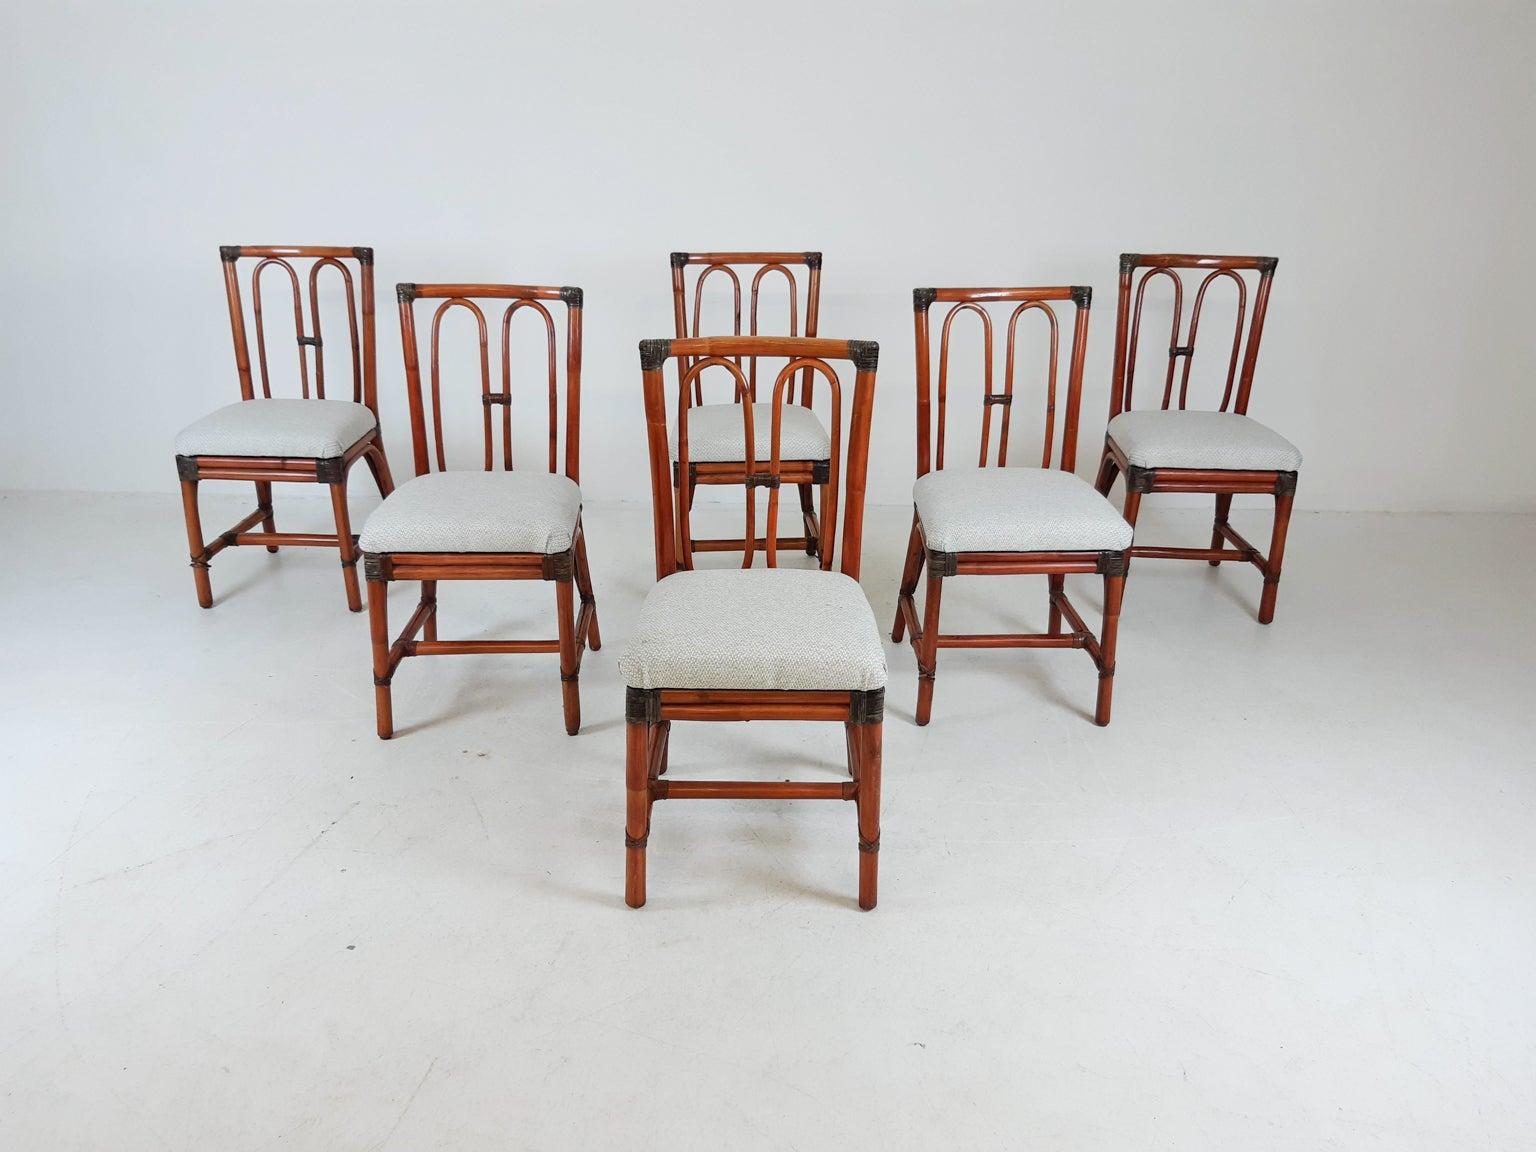 Set of six bamboo dining chairs with leather straps and new fabric. We think they were made by McGuire.

In good condition. A few leather straps have come loose. This is only aesthetic and does not affect firmness.